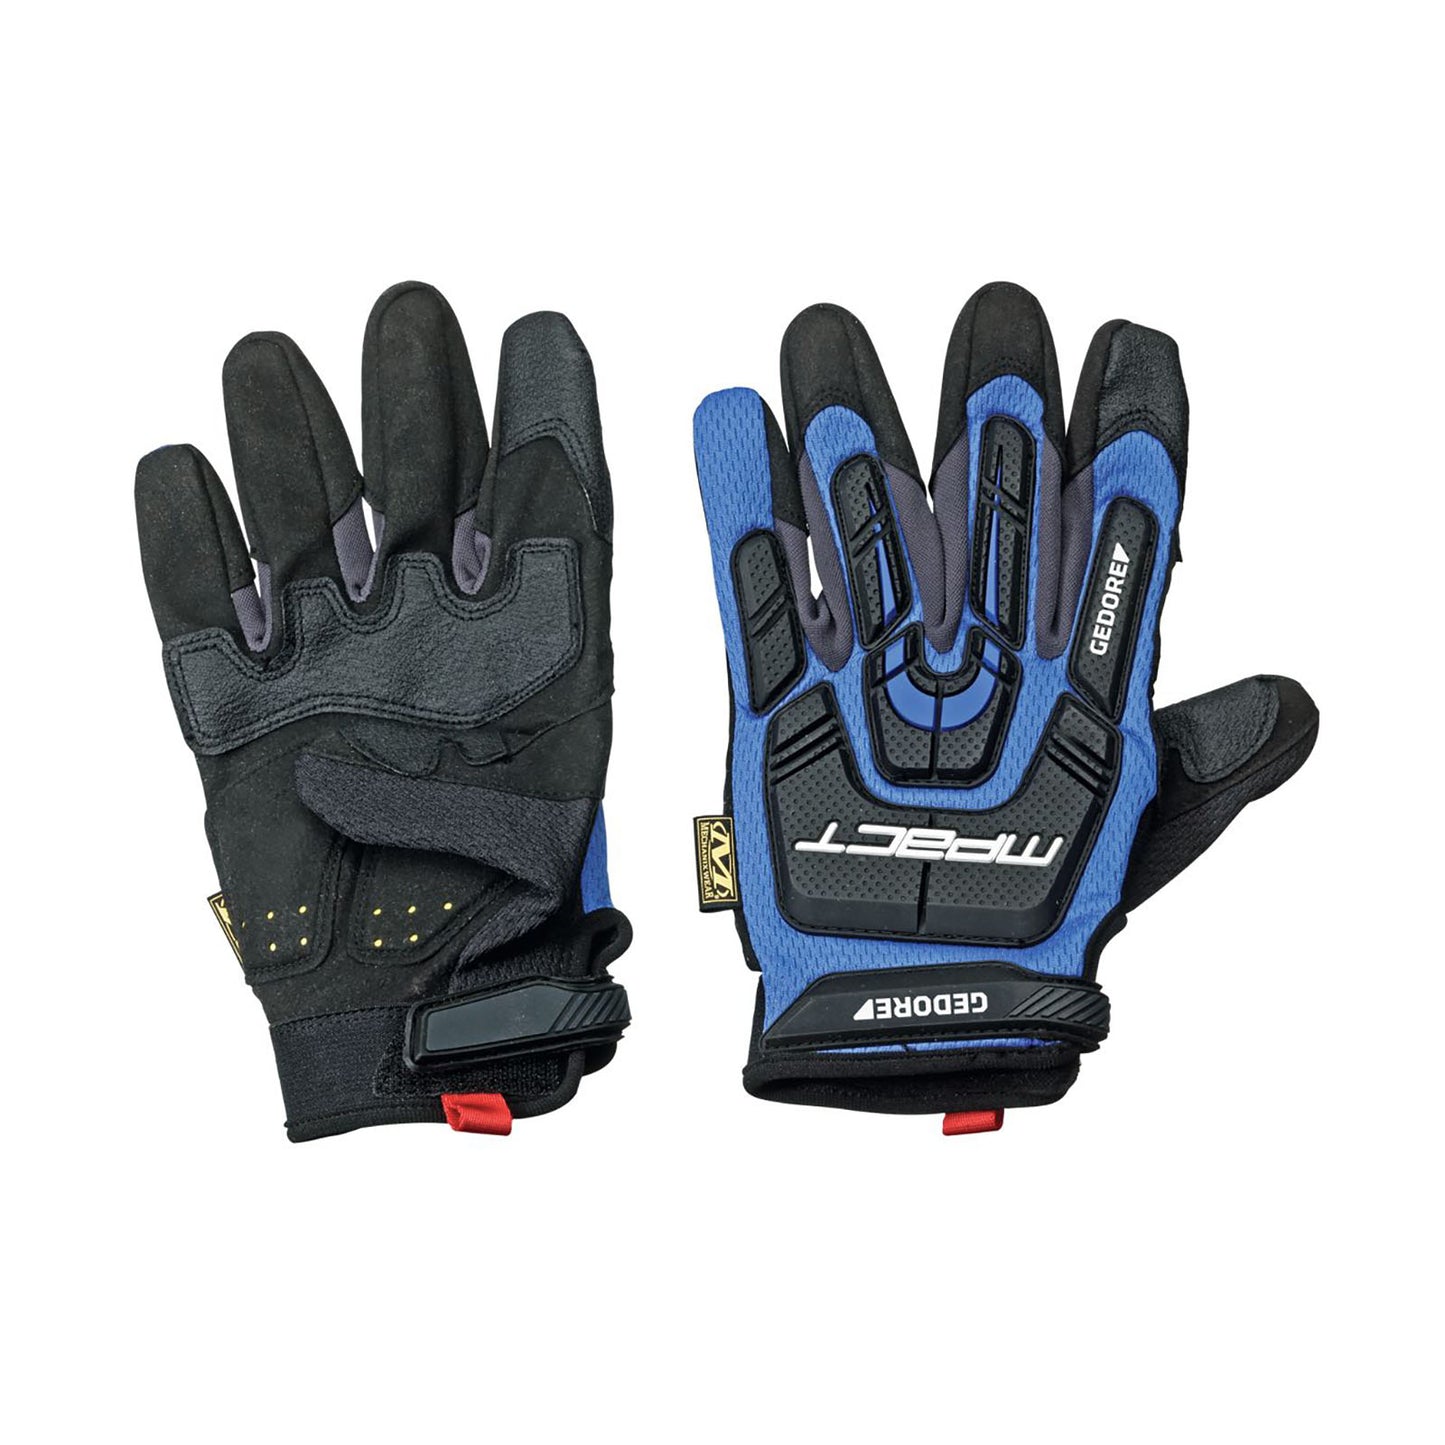 GEDORE 922 9 - Gants M-PACT Taille M/9 (1938746)